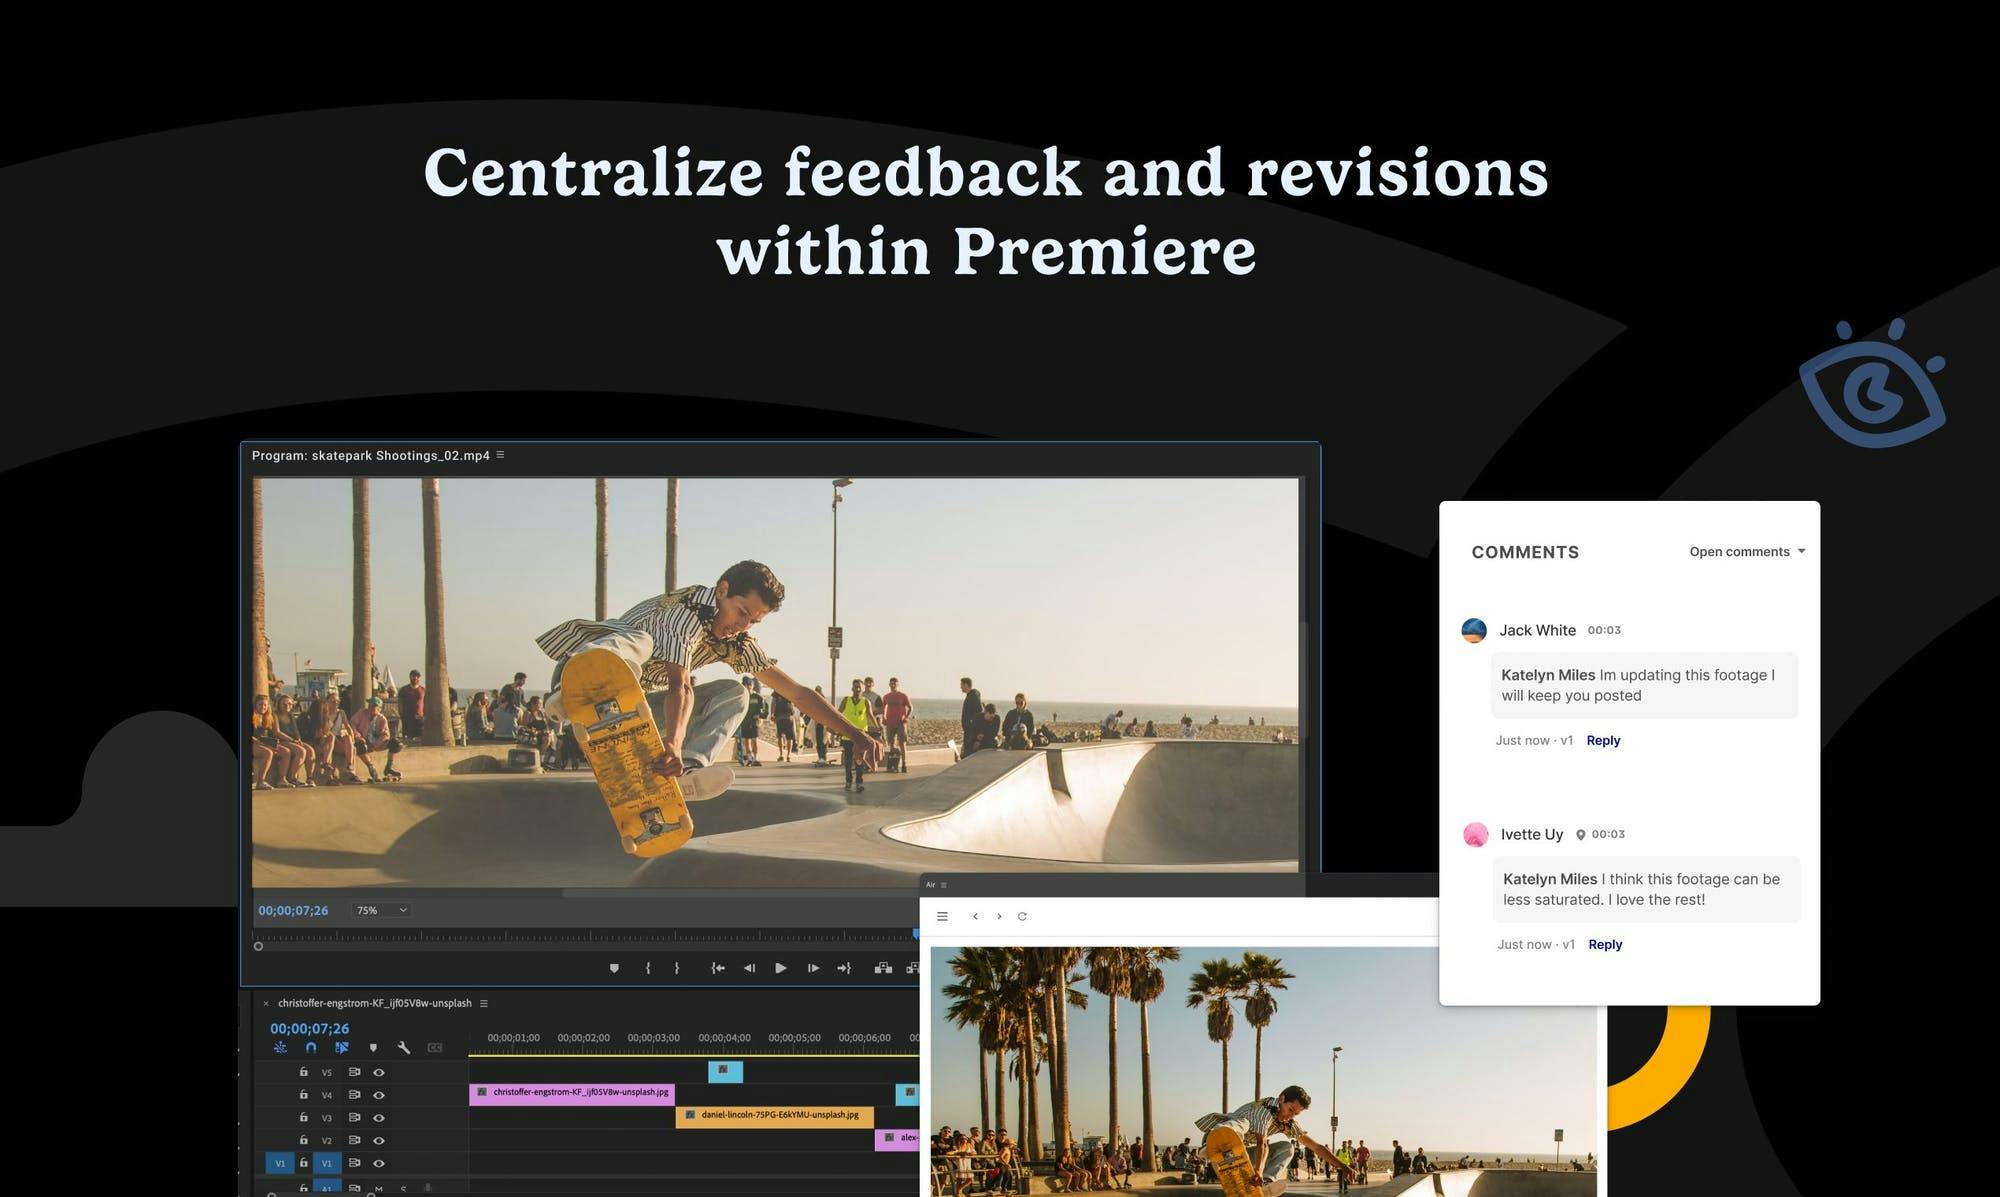 Centralize feedback and revisions within Premiere